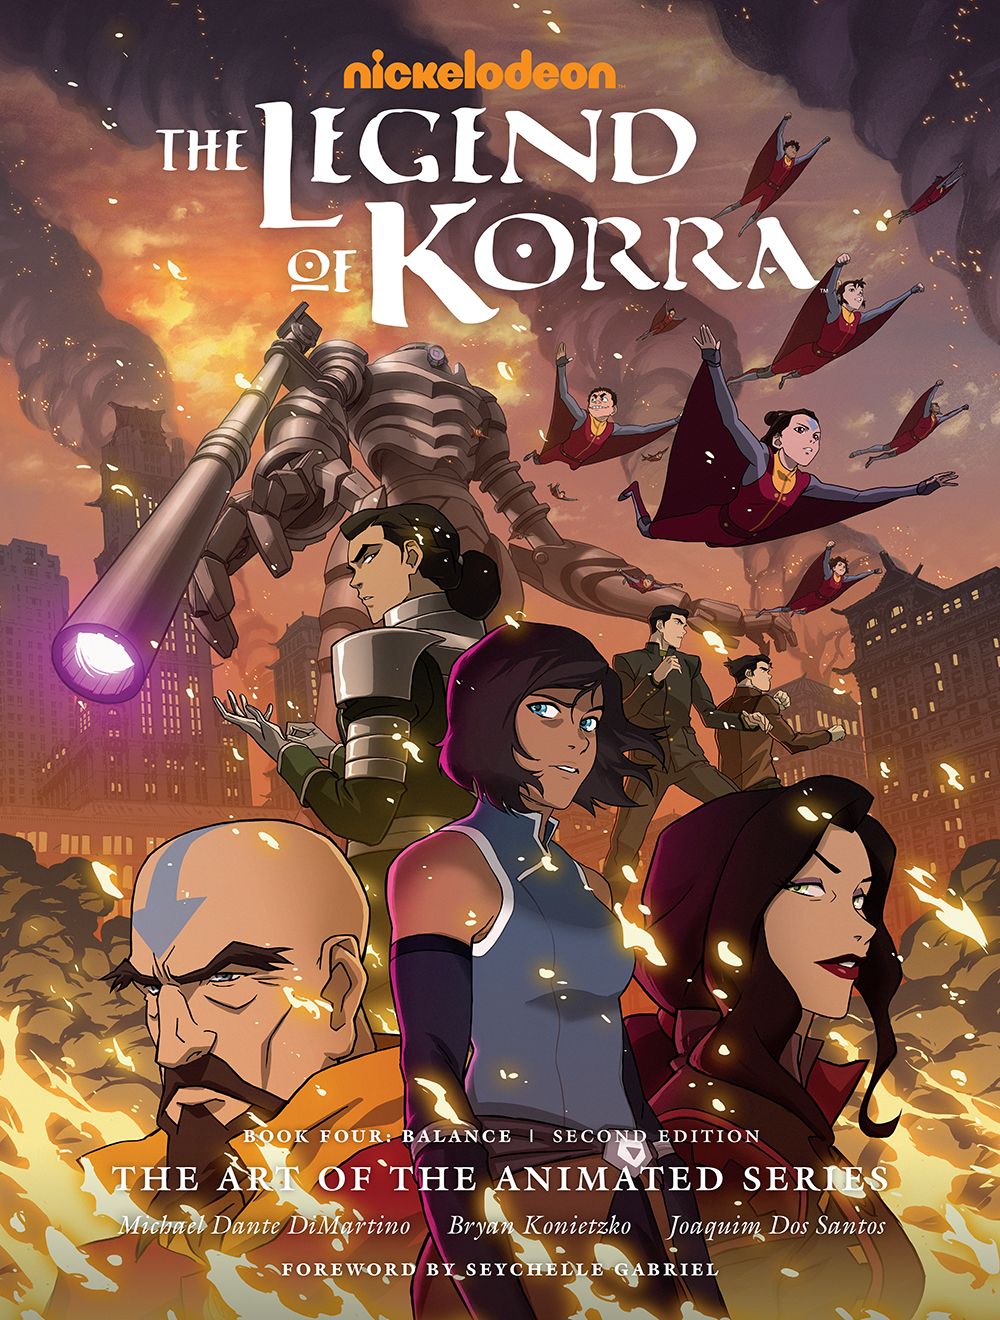 Korra and the cast on the cover of The Legend of Korra The Art of the Animated Series